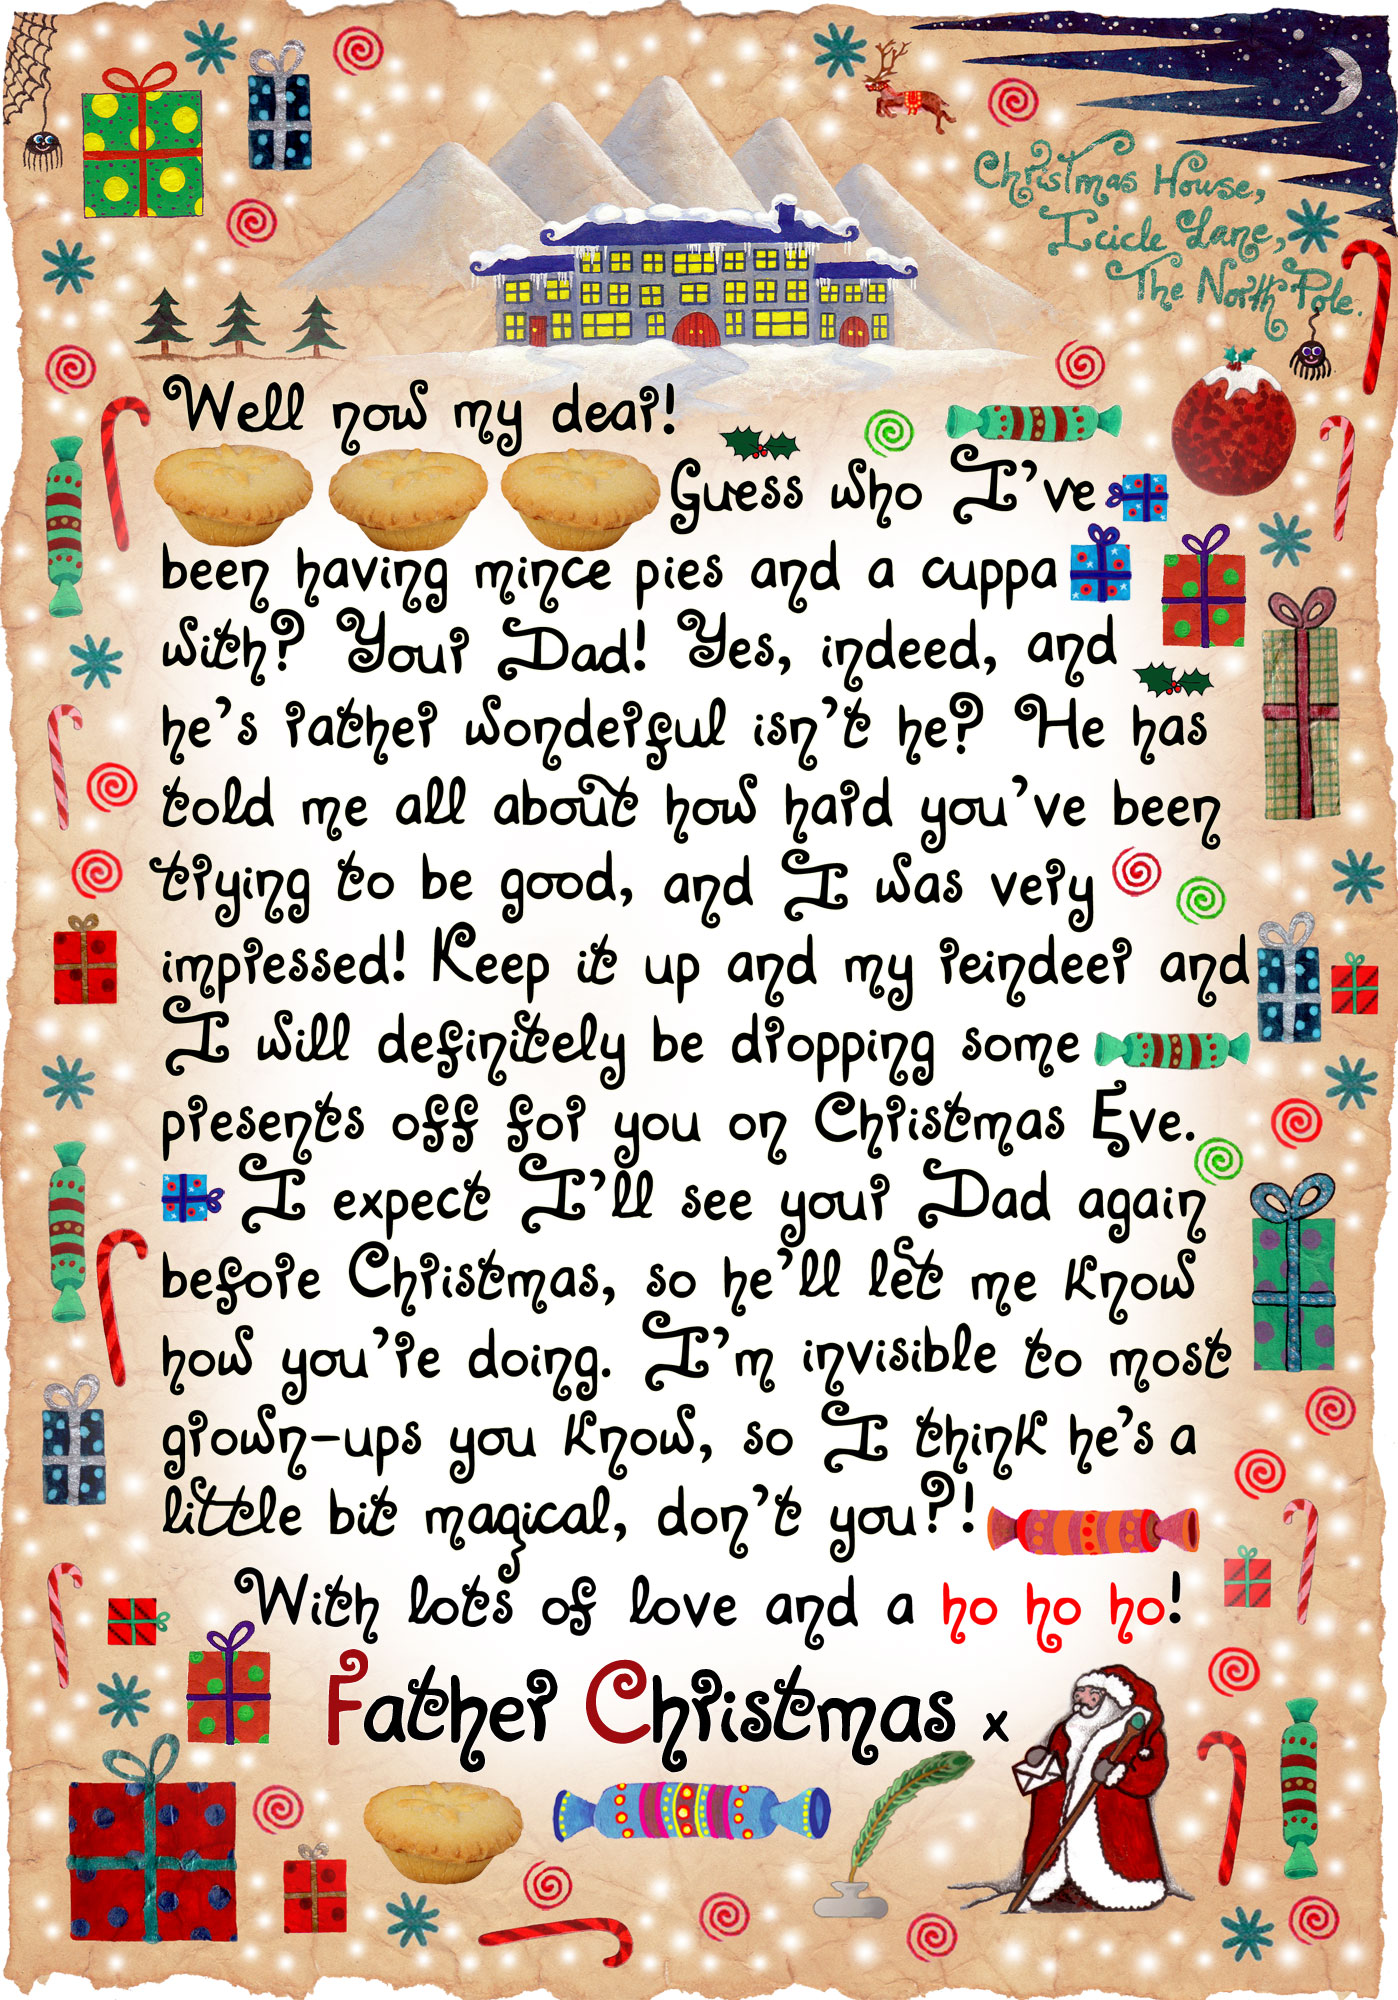 A lovely letter from Father Christmas to print for your child. In it, Santa explains how he has had a cuppa and some mince pies with your Dad, who told him you're trying very hard to be good.